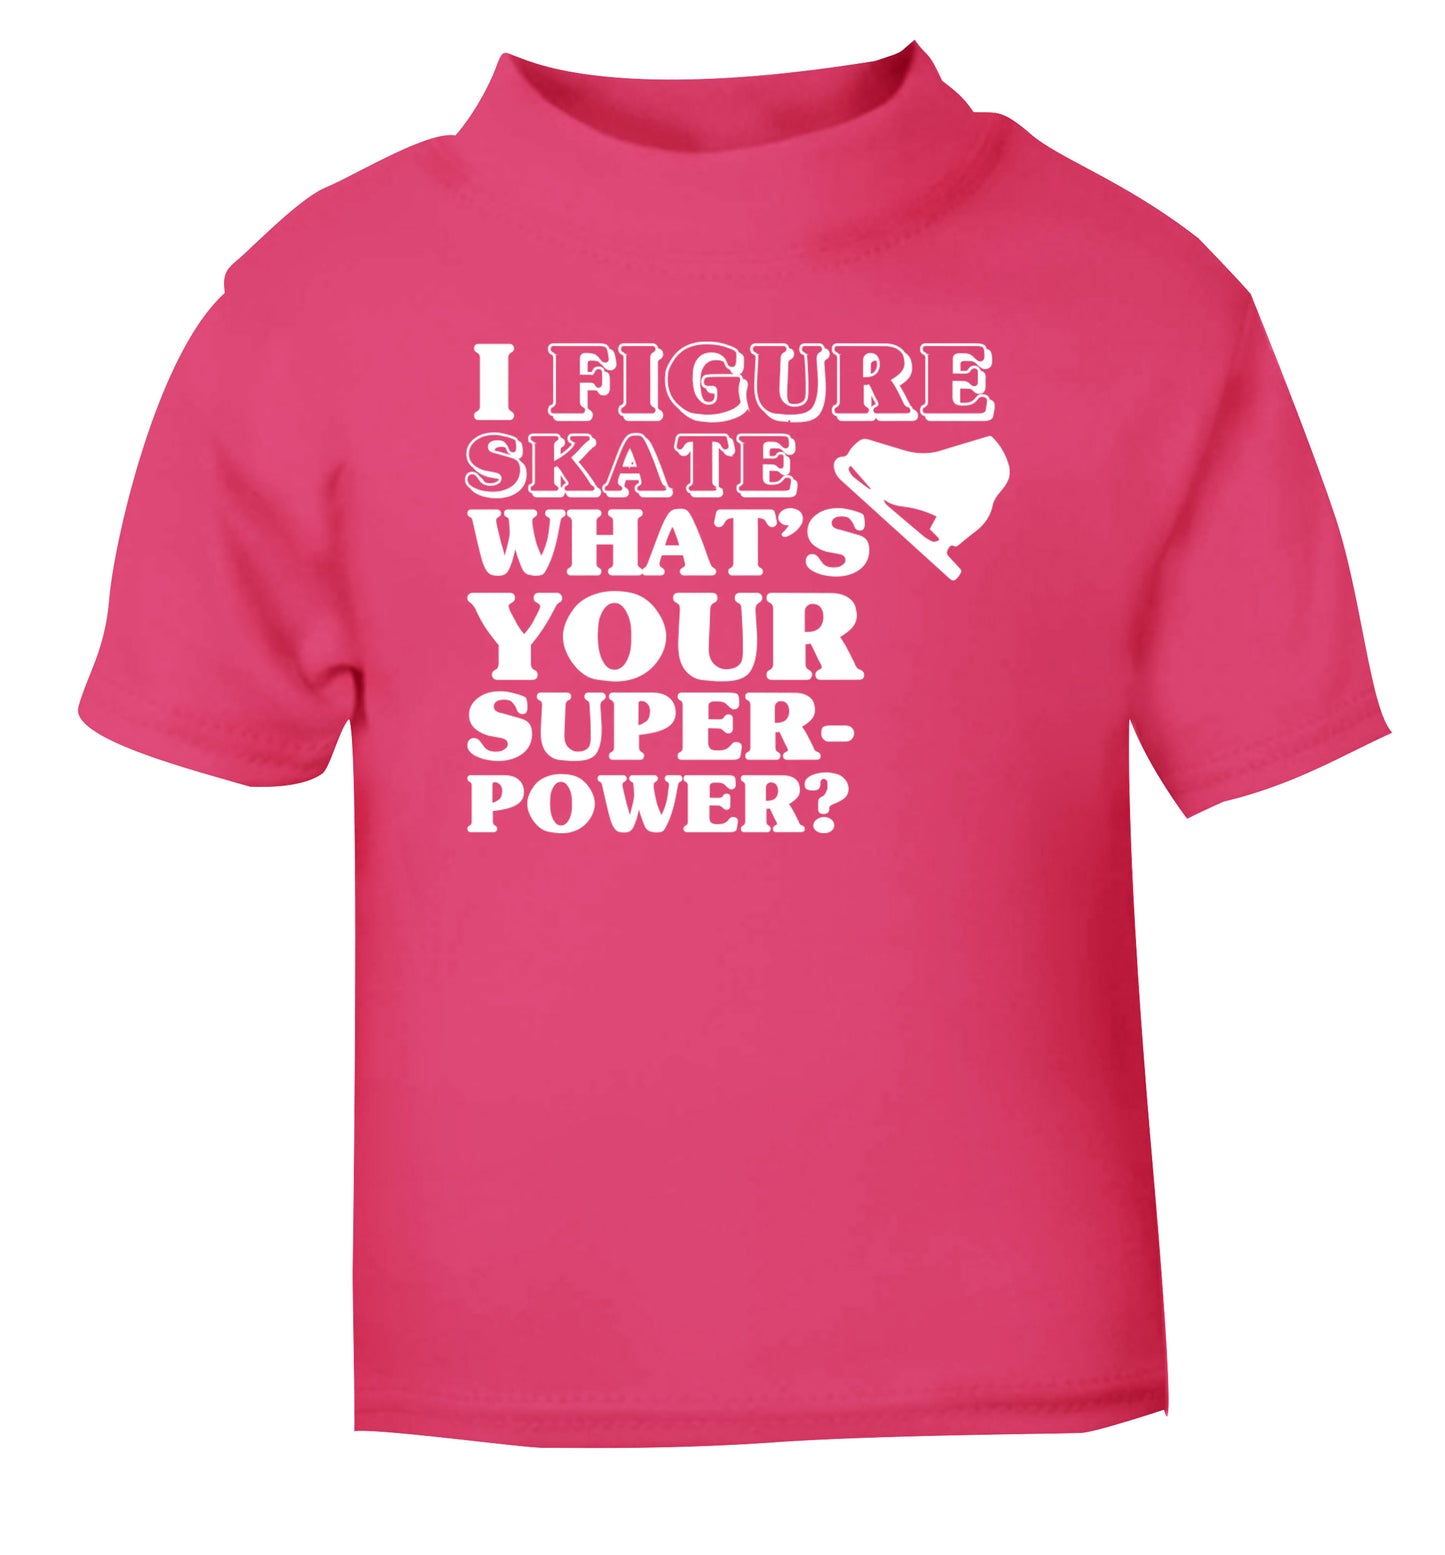 I figure skate what's your superpower? pink Baby Toddler Tshirt 2 Years